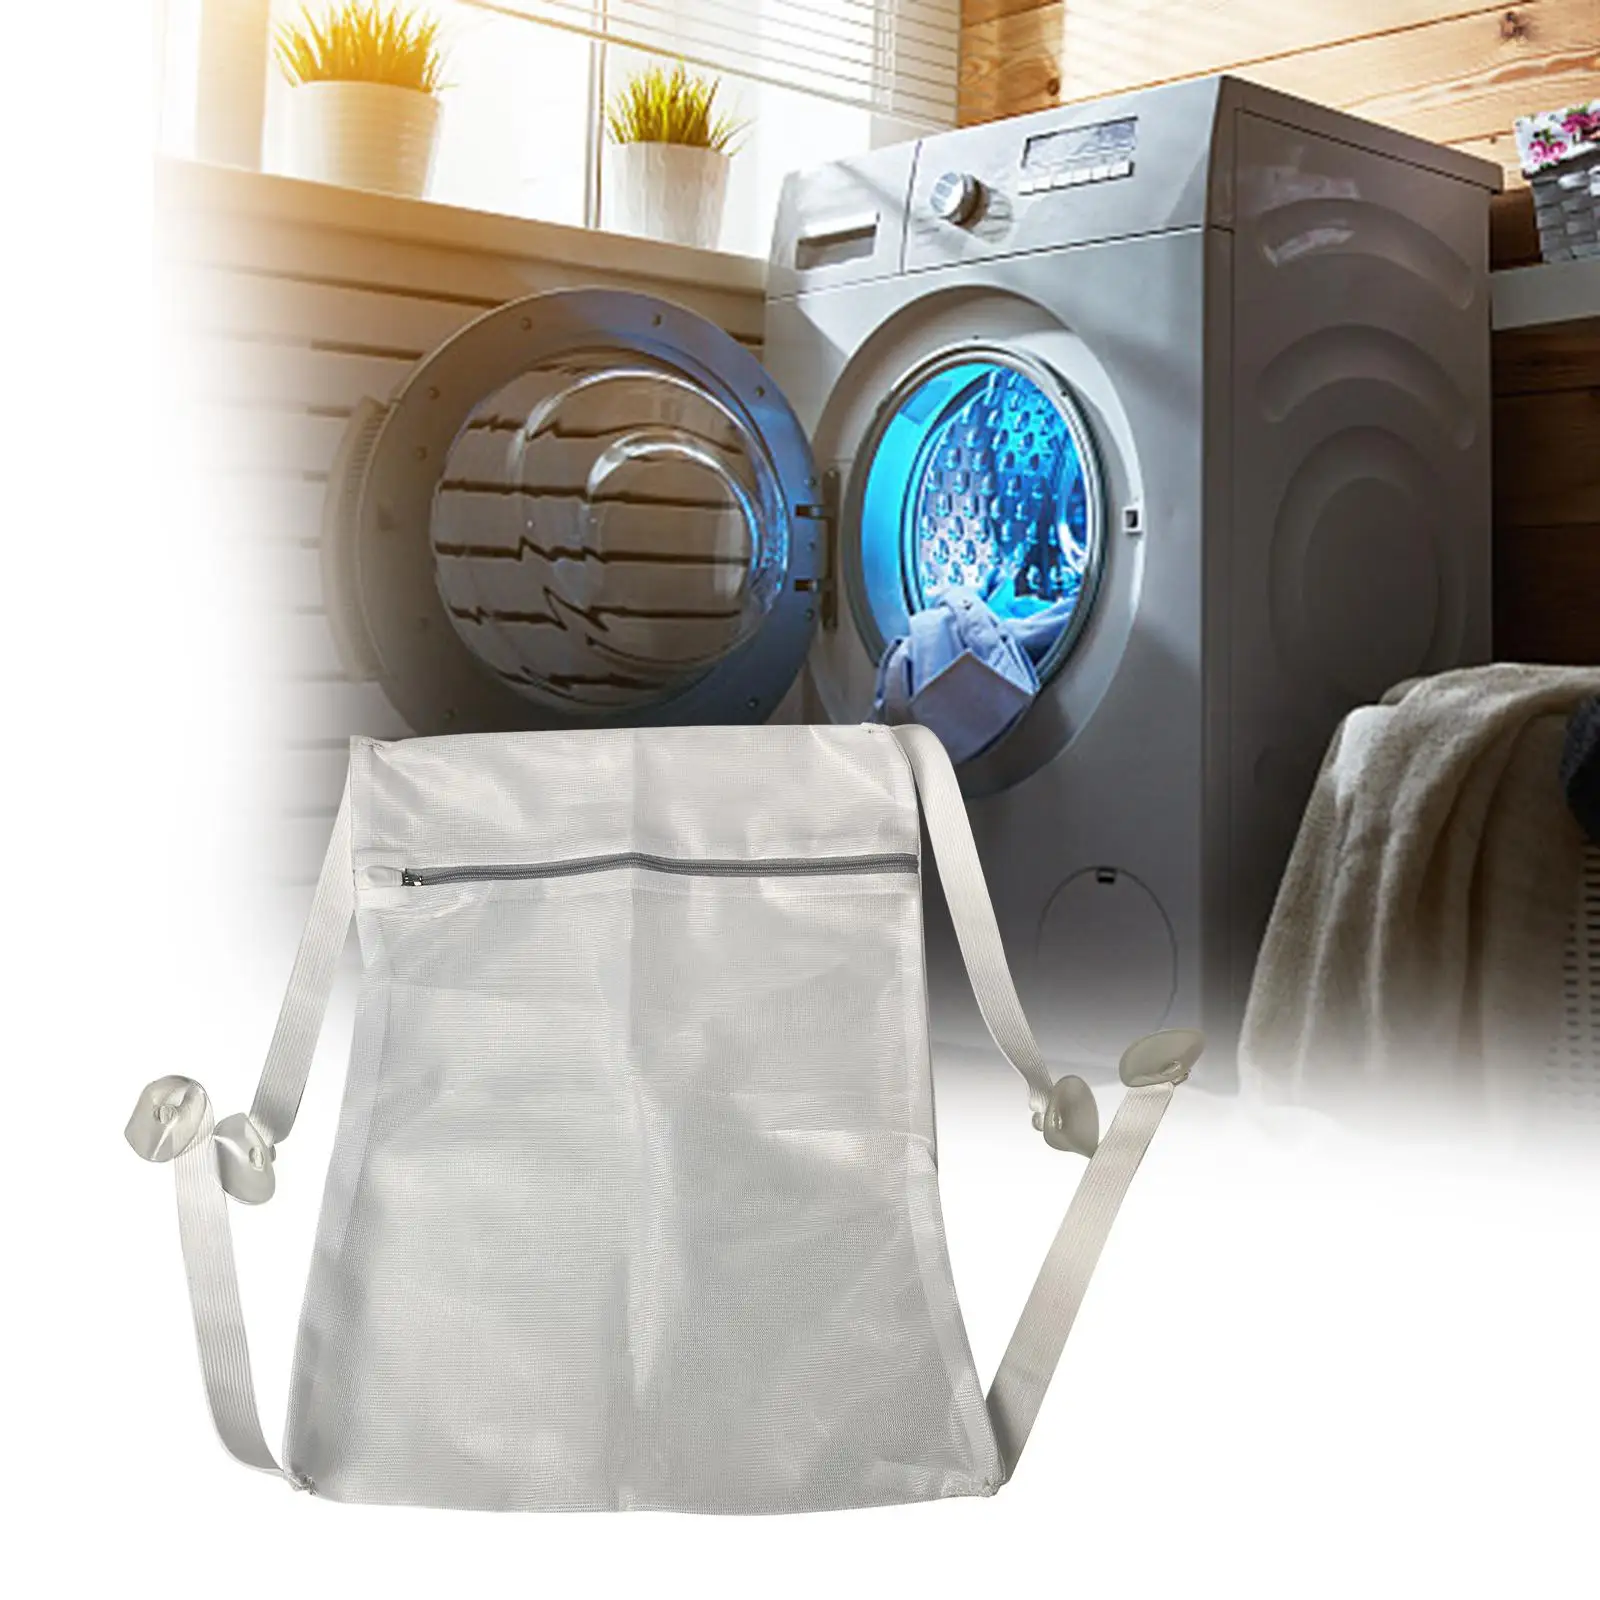 Wash Bag Machine Washable Polyester Fine Mesh Laundry Bags for Clothing Home